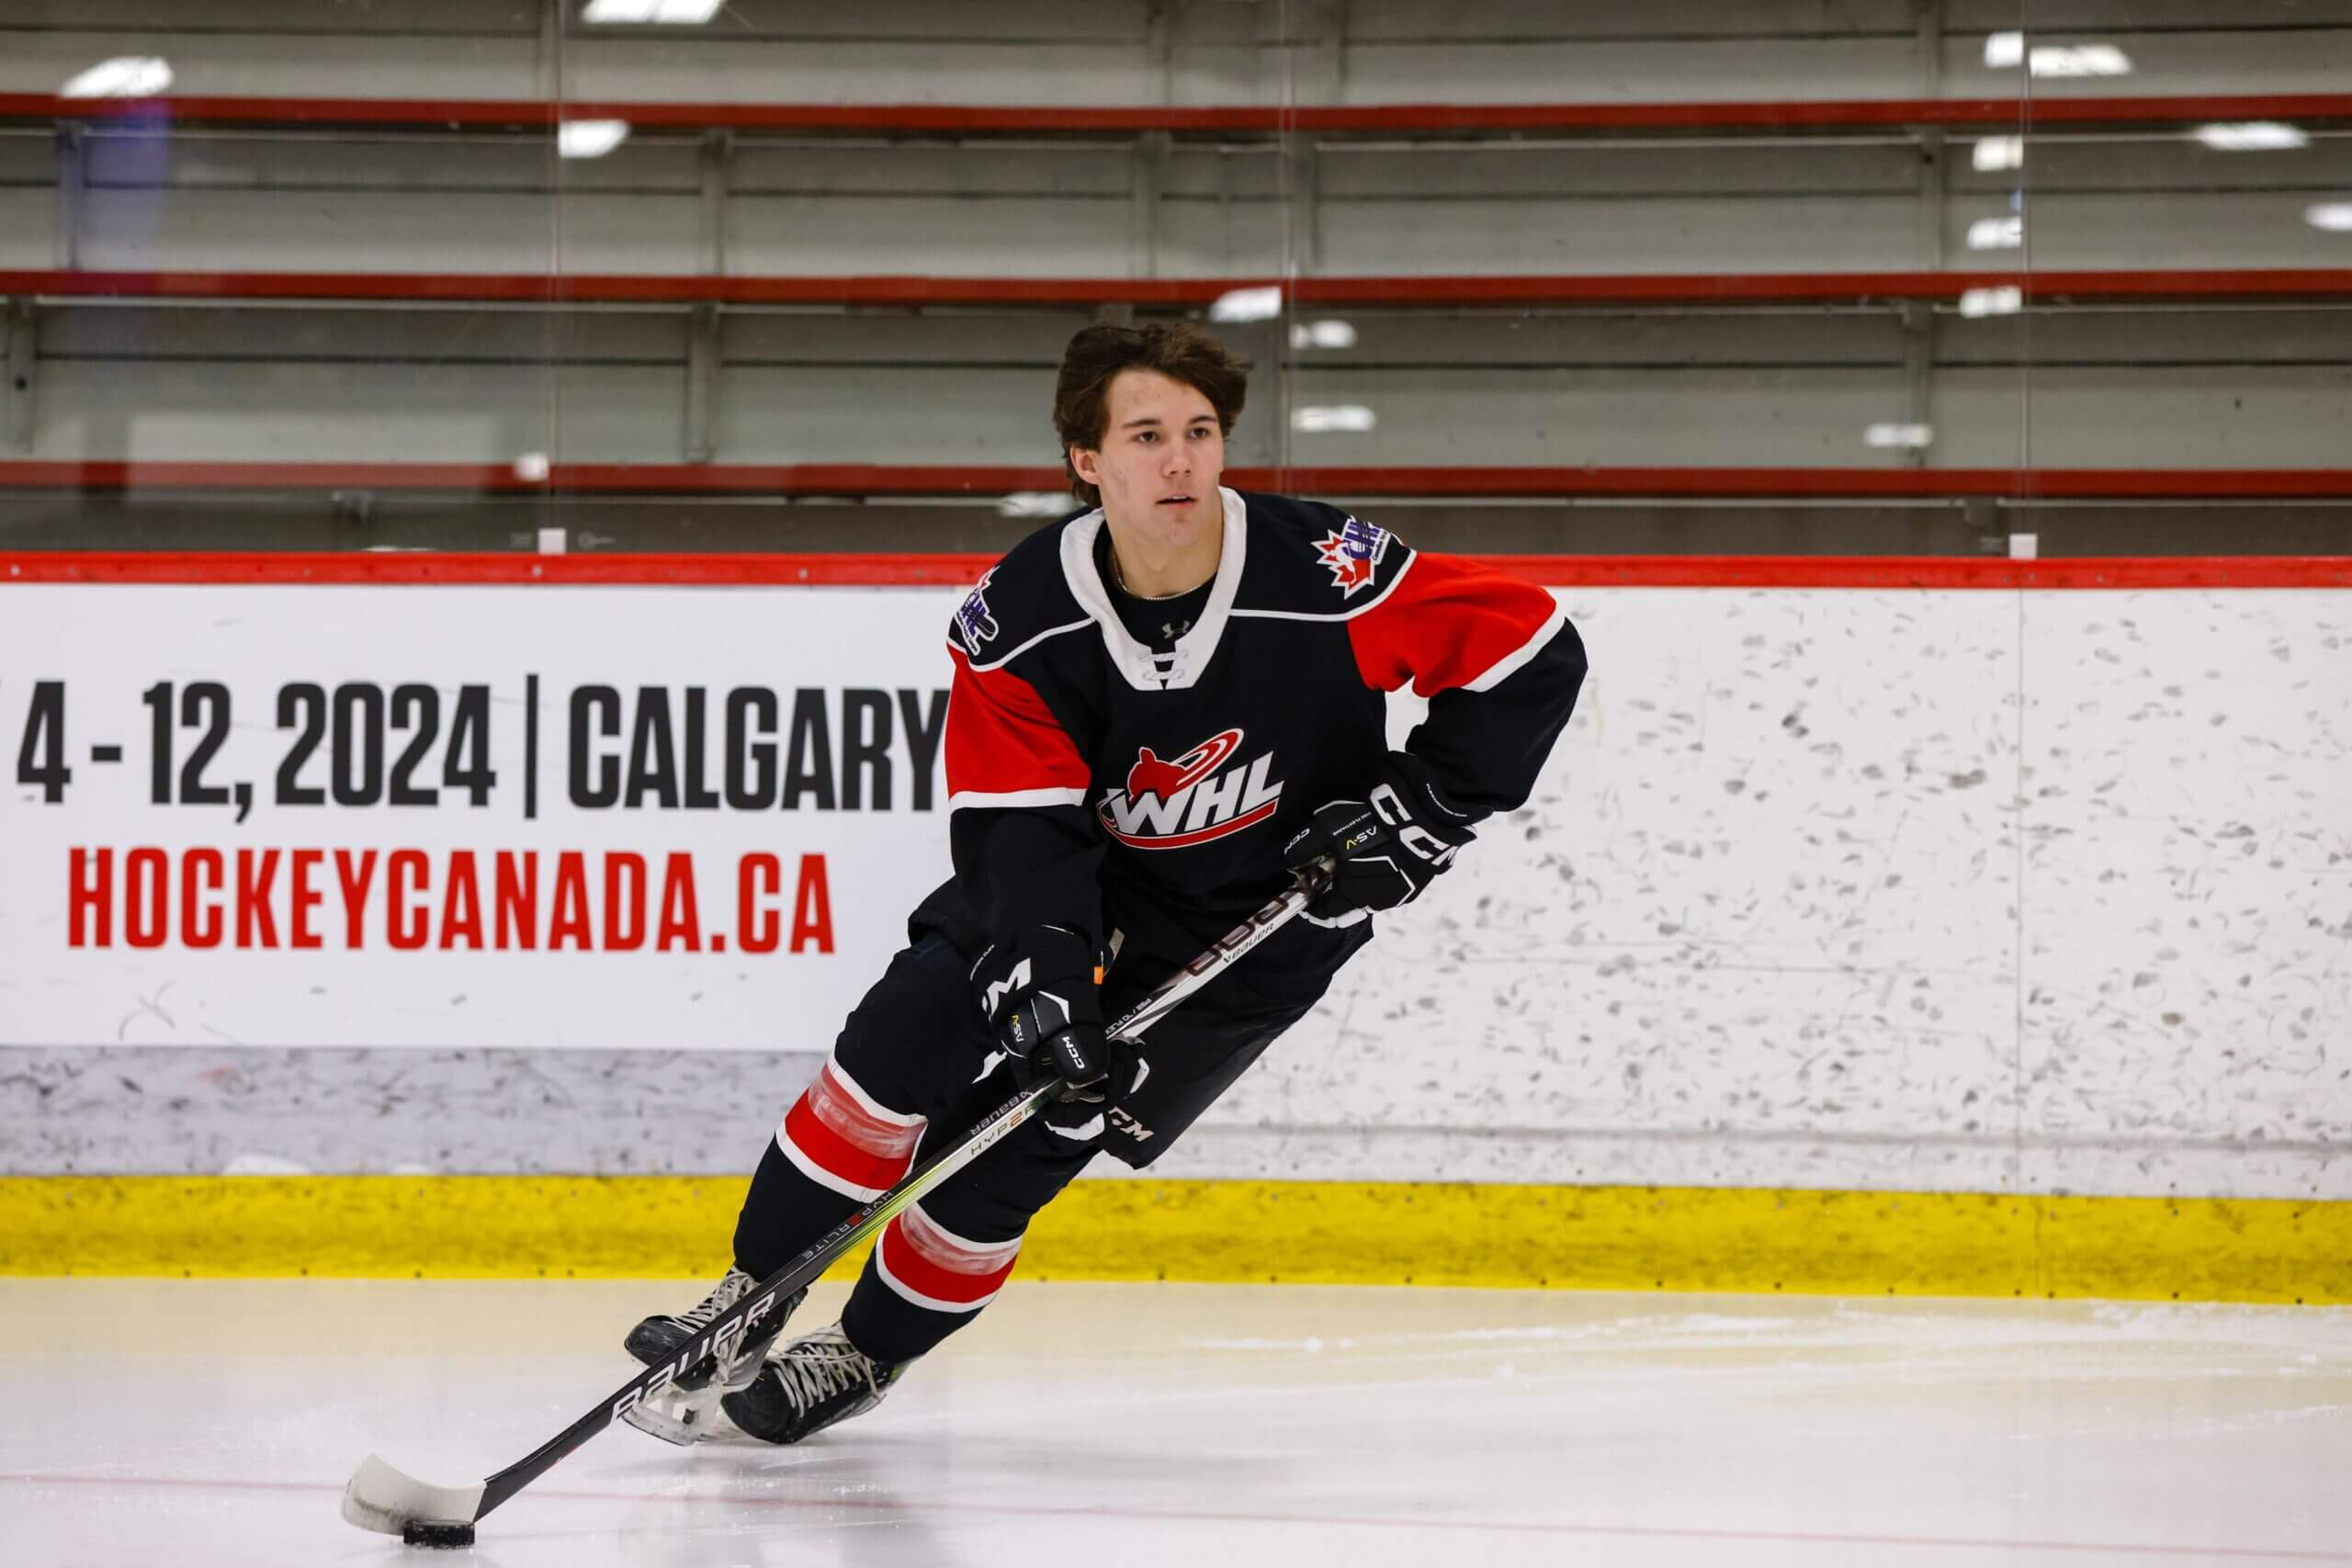 15-Year-Old Hockey Prodigy Shatters WHL Records!